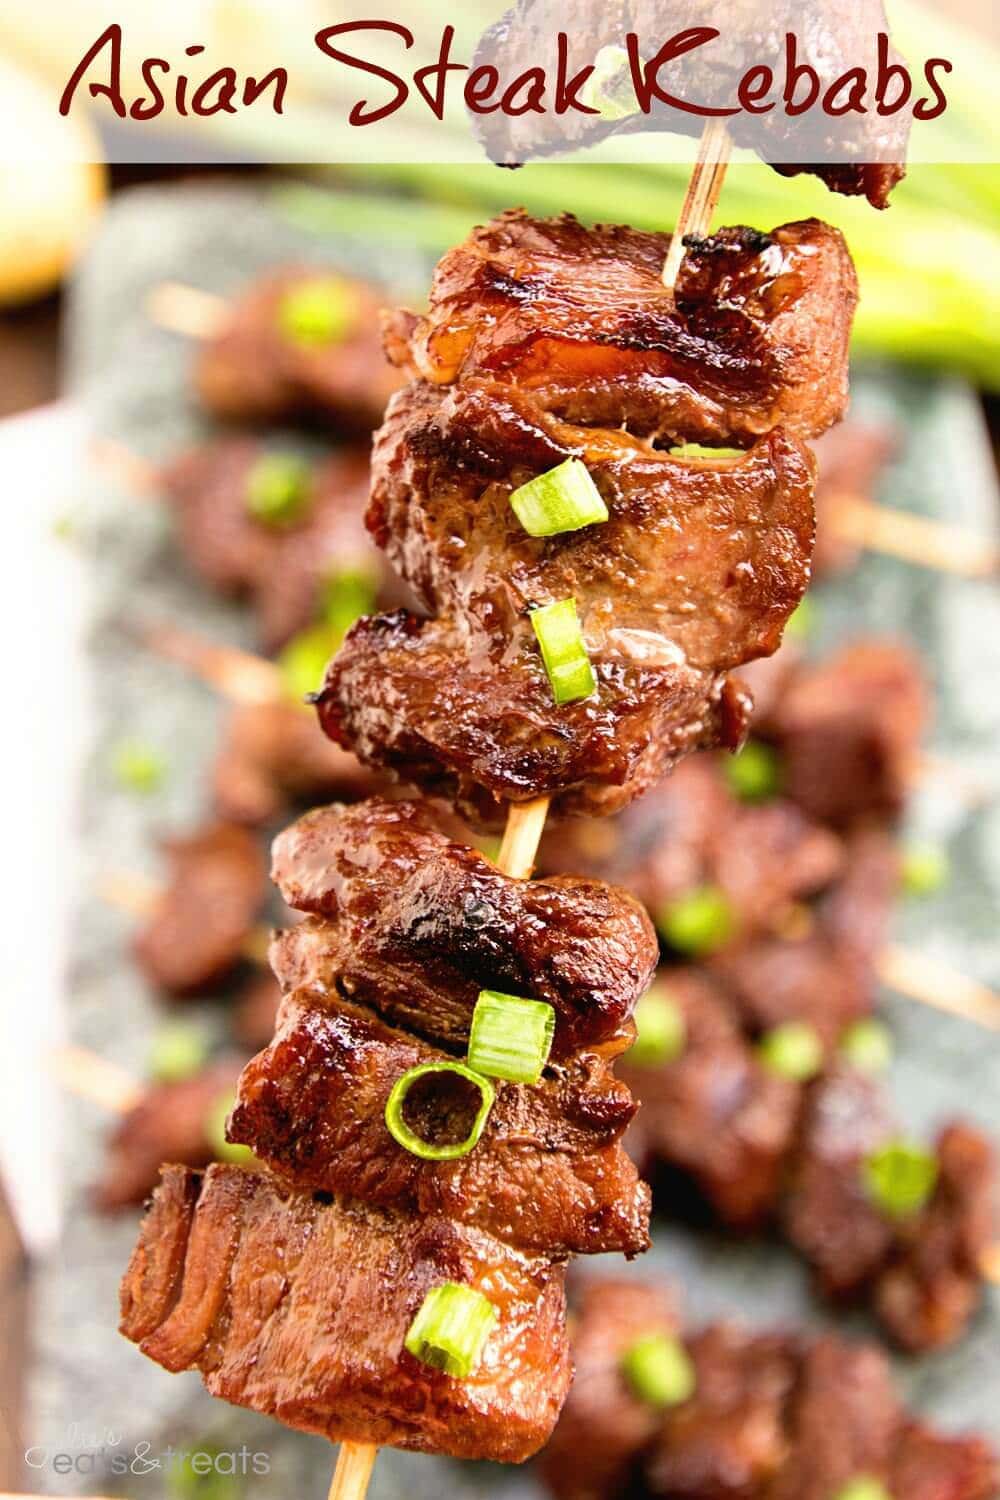 Asian Steak Kebabs ~ Tender, Juicy Steak Bites in a Delicious Asian Marinade! The Perfect Quick & Easy Recipe to Fire Up the Grill With! 